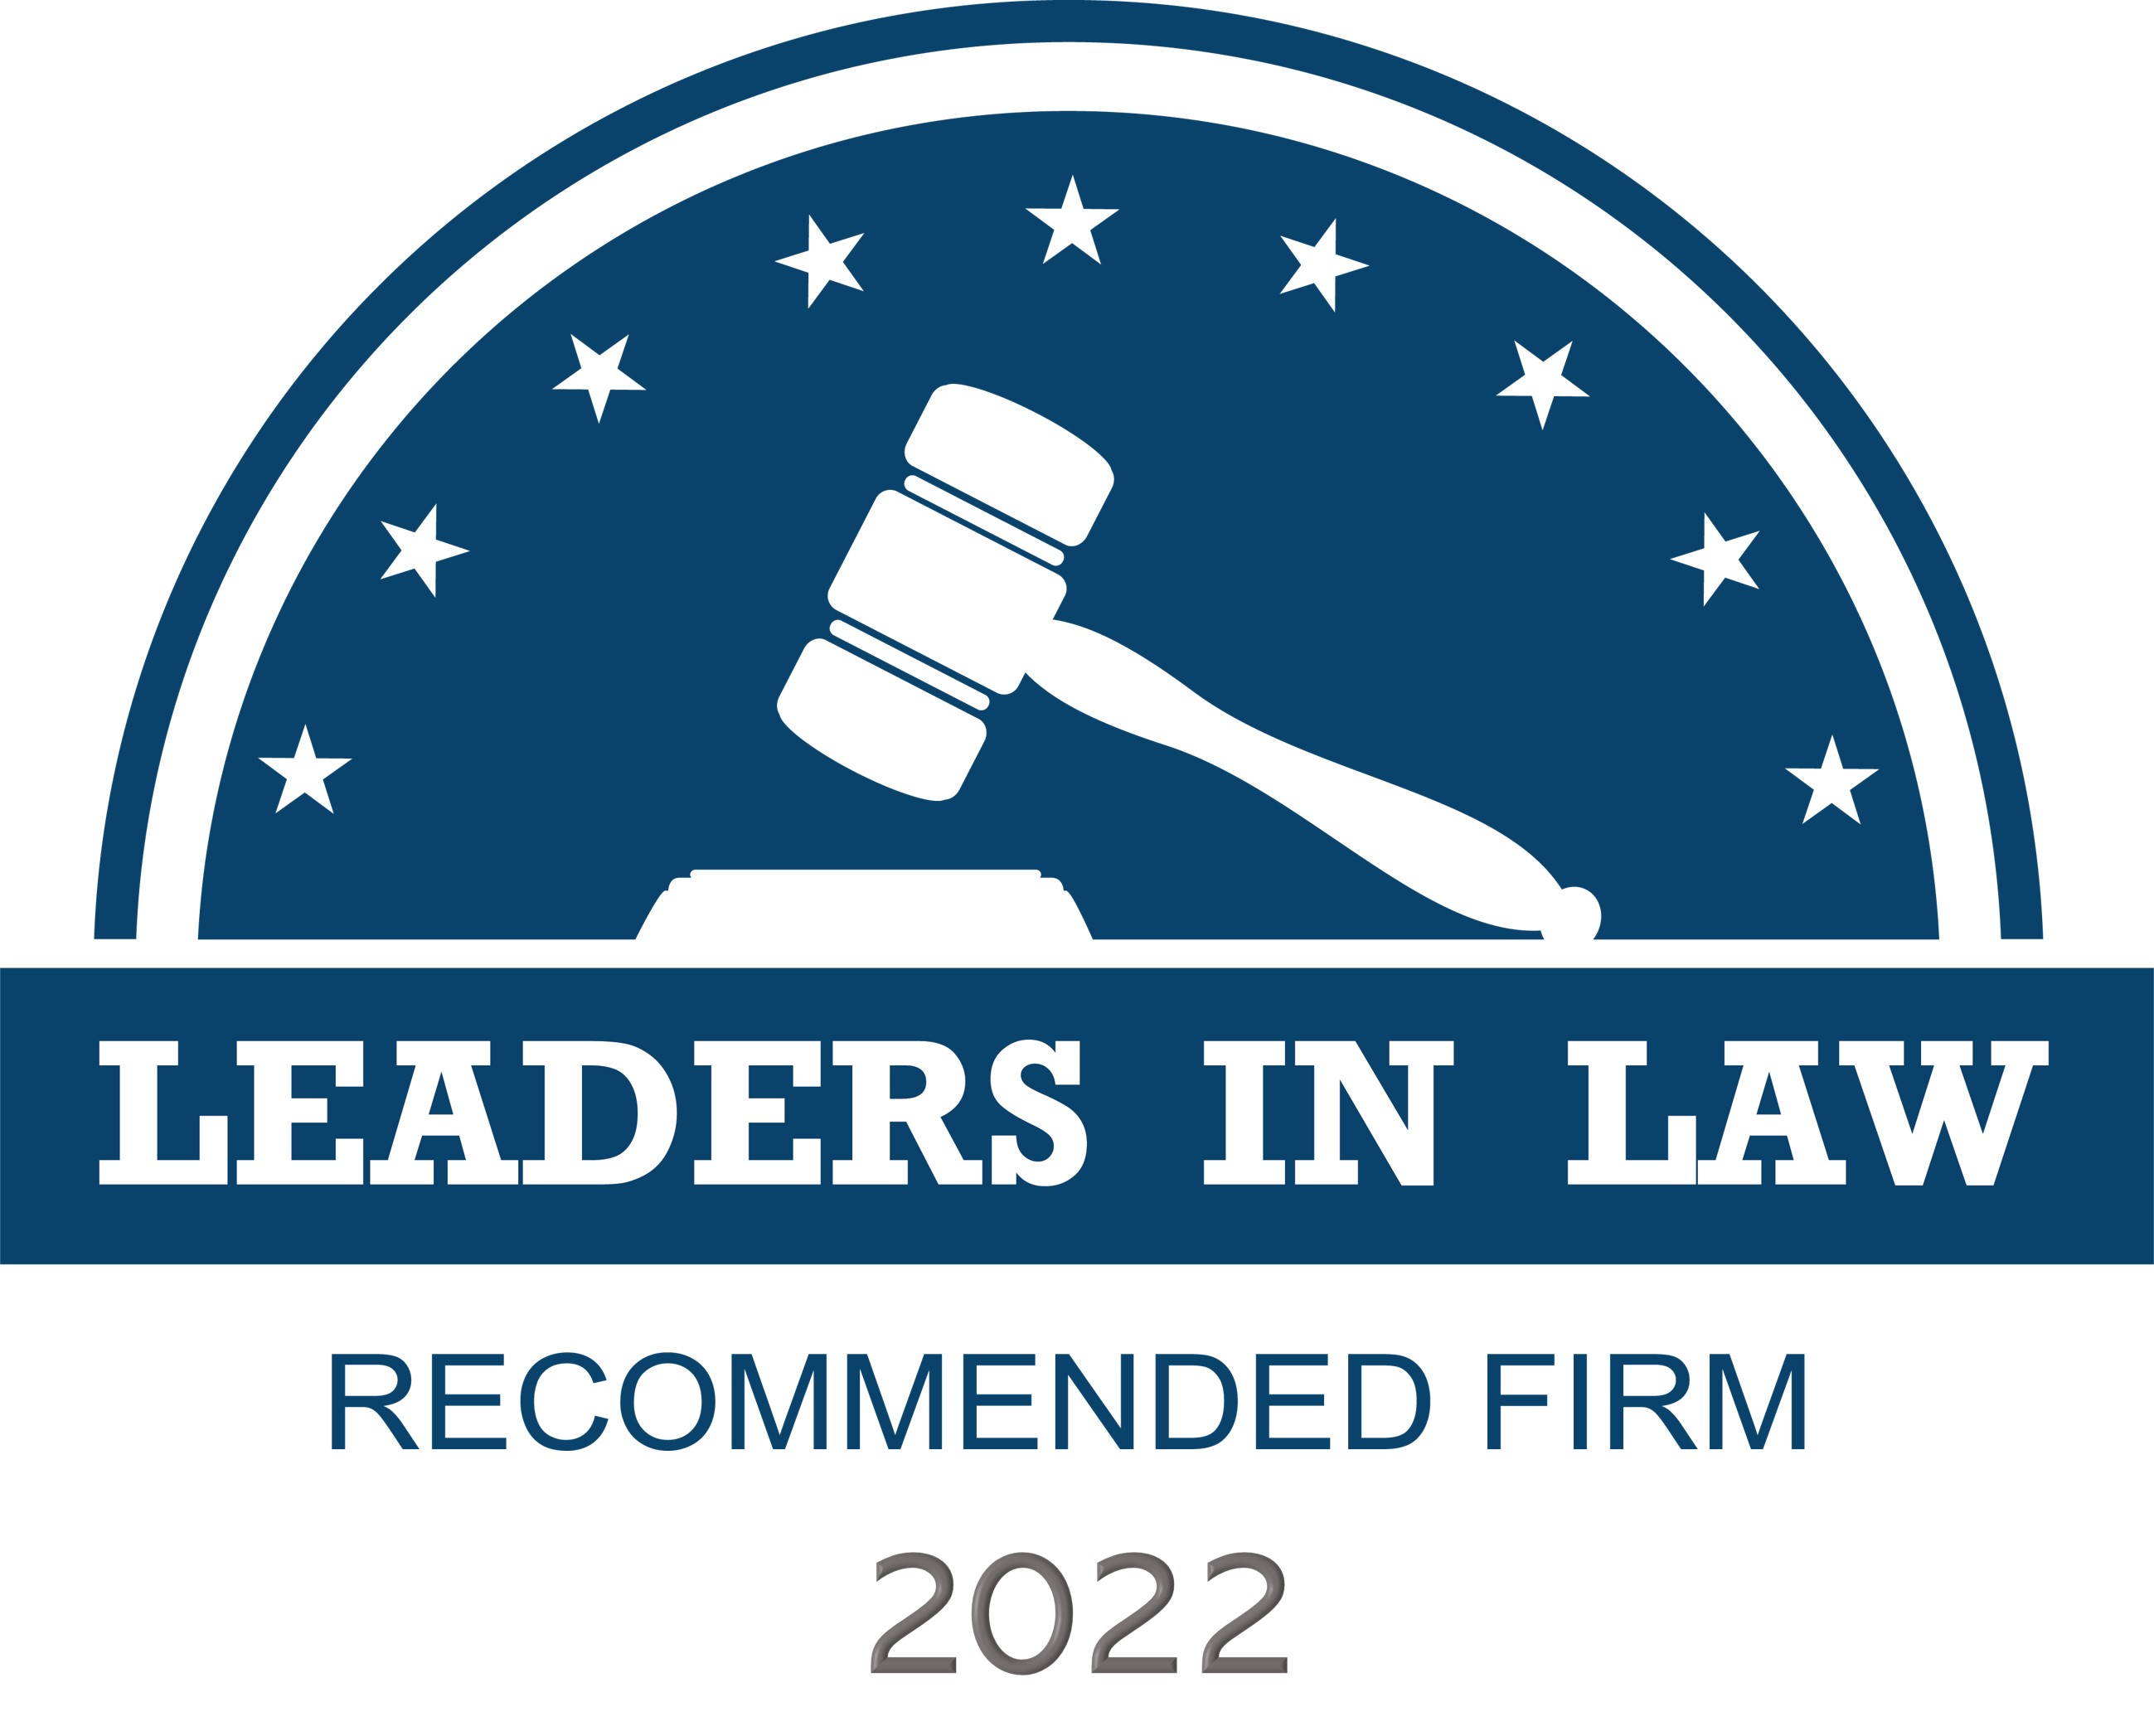 Named as an exclusive "Recommended M&A Firm" and "Recommended M&A Lawyer" in Hong Kong by Leaders in Law, 2022